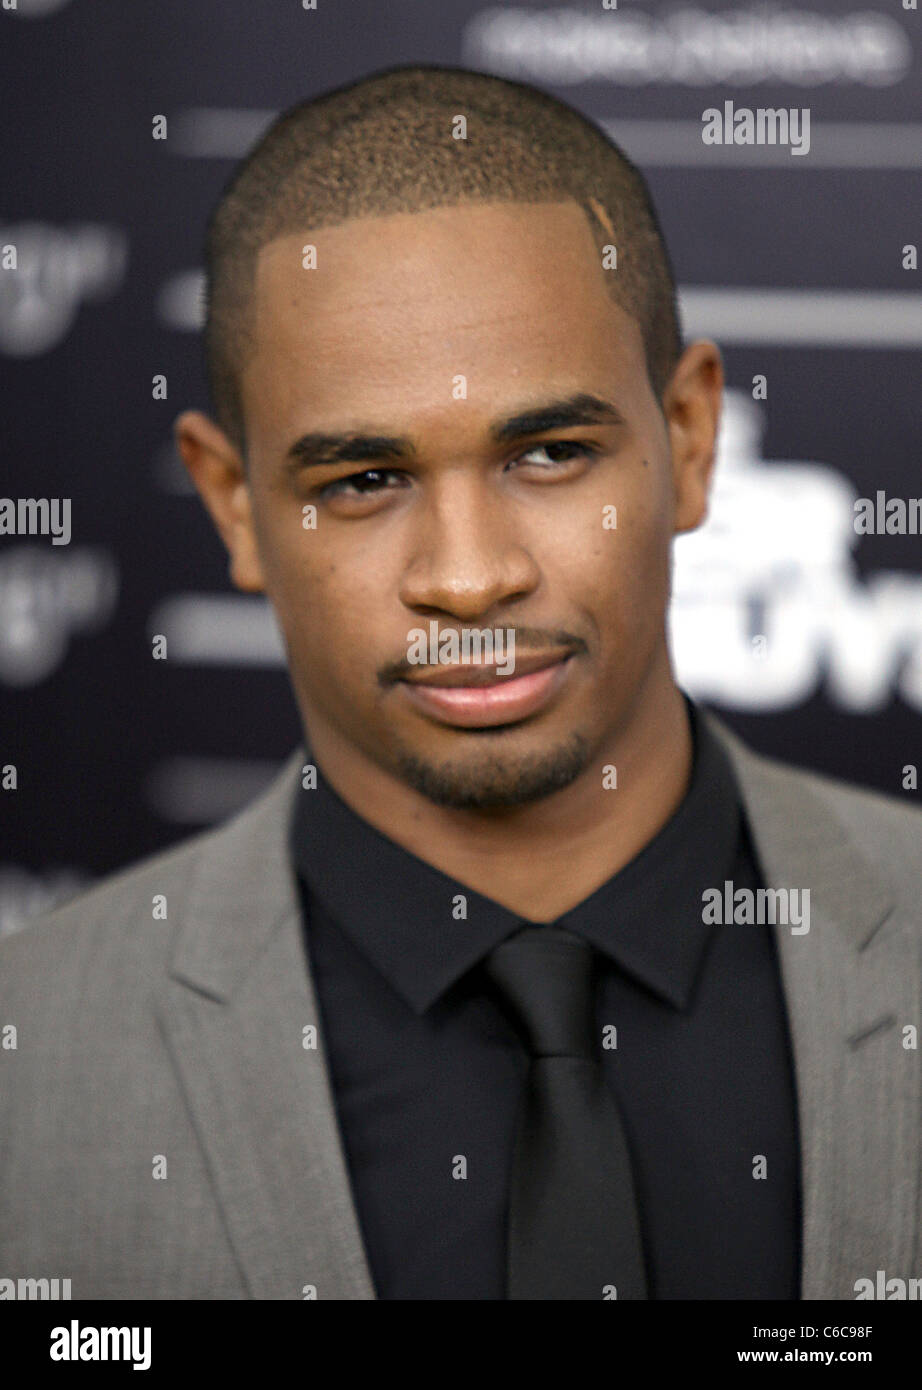 Damon Wayans Jr. attend the NY movie premiere of 'The Other Guys' at the Ziegfeld Theatre New York City, USA - 02.08.10 Stock Photo